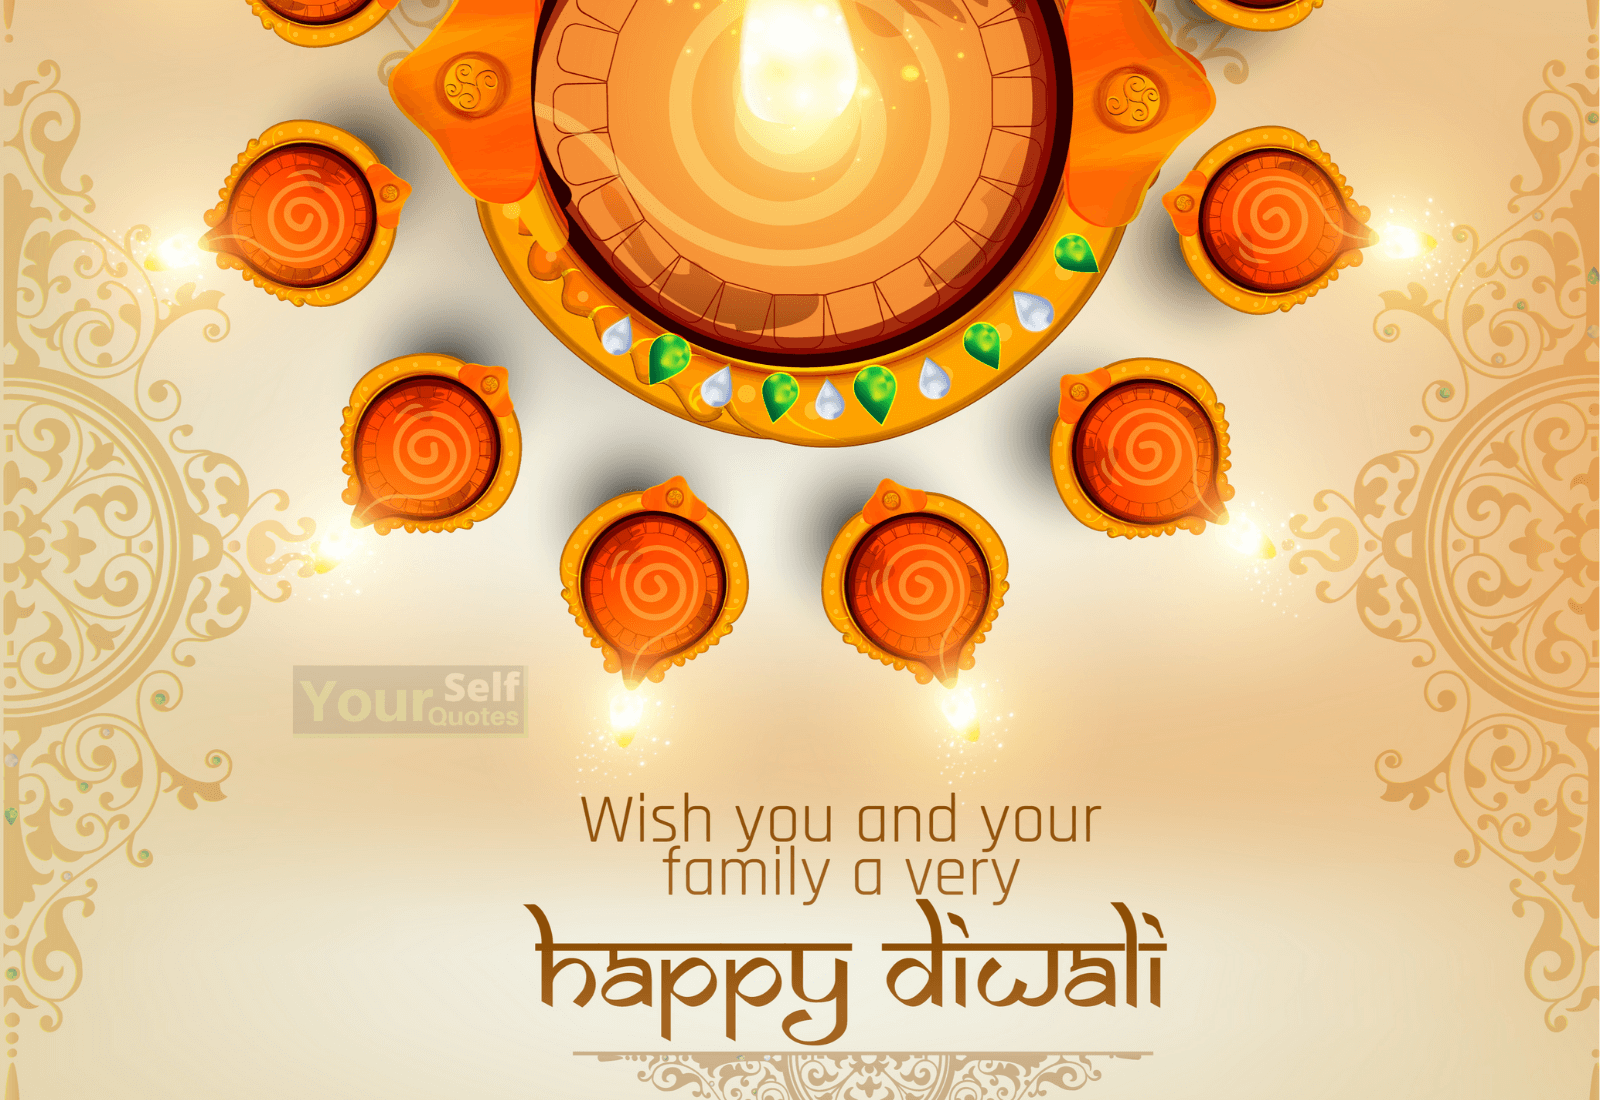 2019 Happy Diwali Images, Photos, Pictures, Wallpapers - Happy Diwali To You And Your Family , HD Wallpaper & Backgrounds